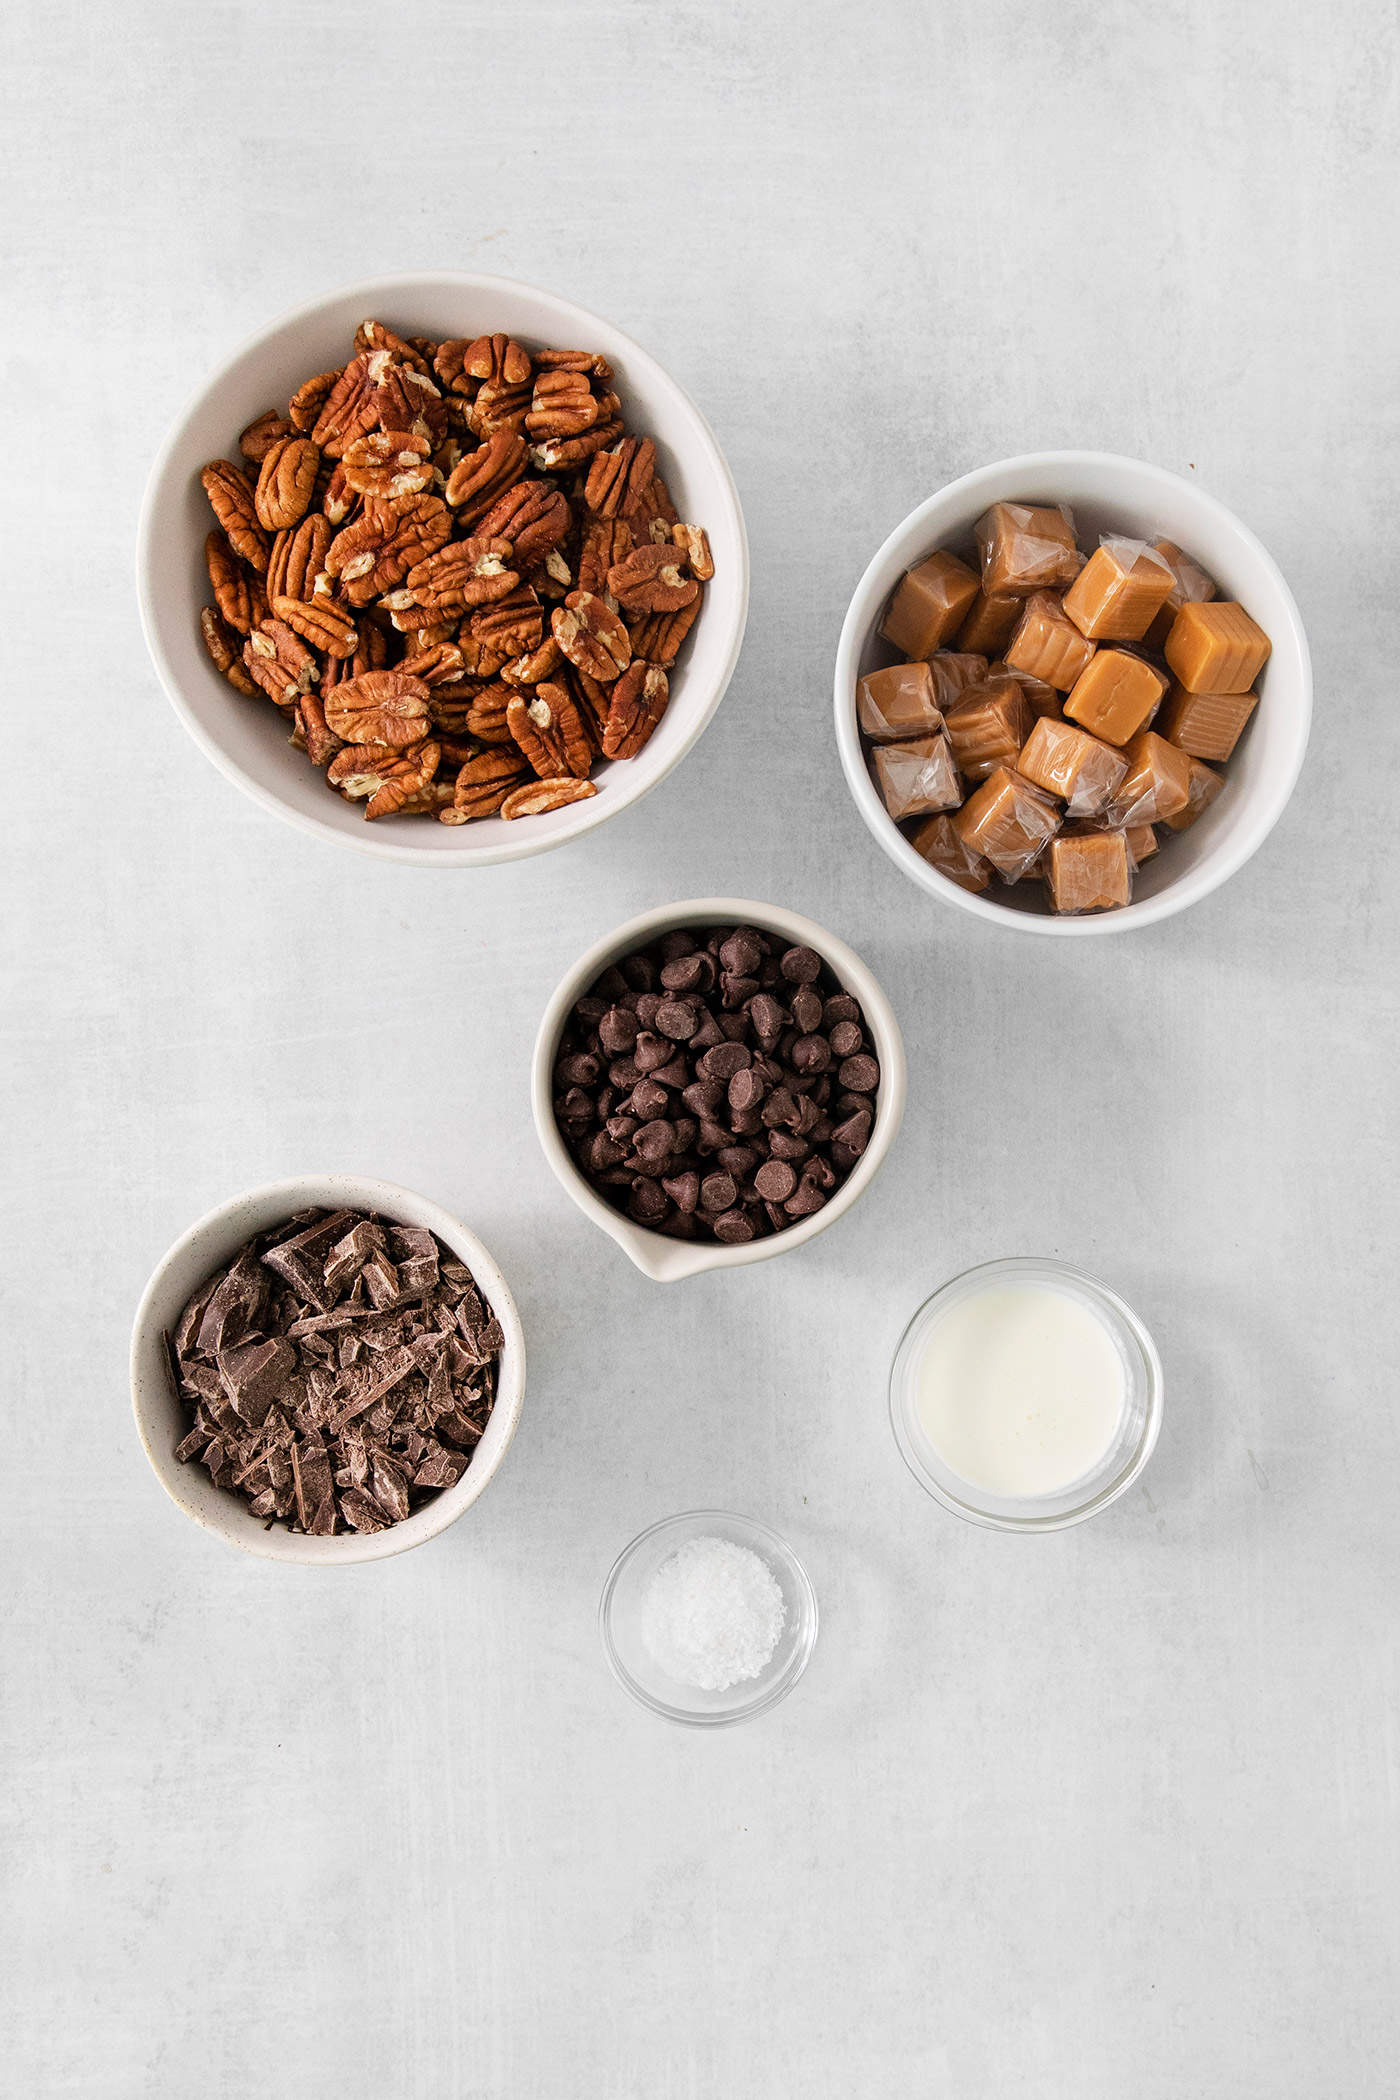 The ingredients for chocolate turtles are shown portioned out into bowls: chocolate chips, caramel, salt, pecans, chocolate bark, and heavy cream.